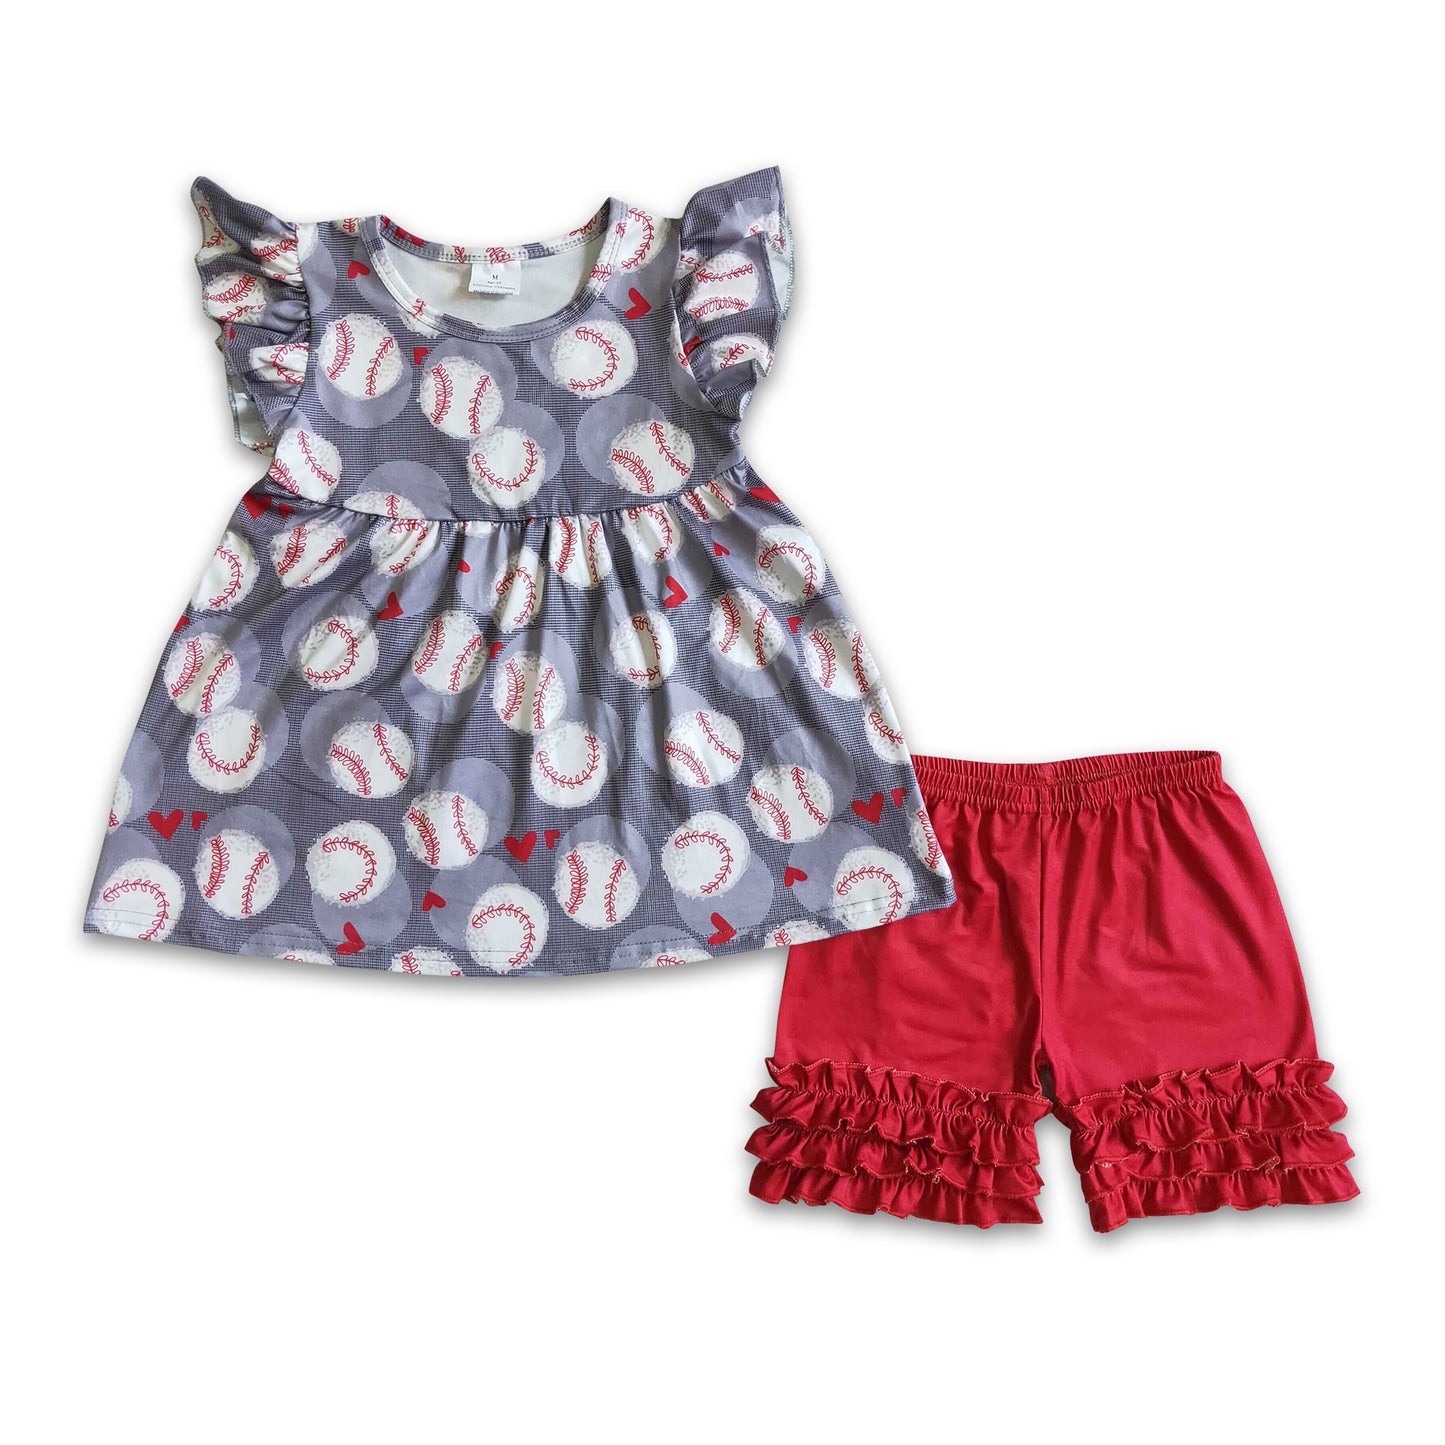 Flutter sleeve baseball top red icing ruffle shorts girls outfits